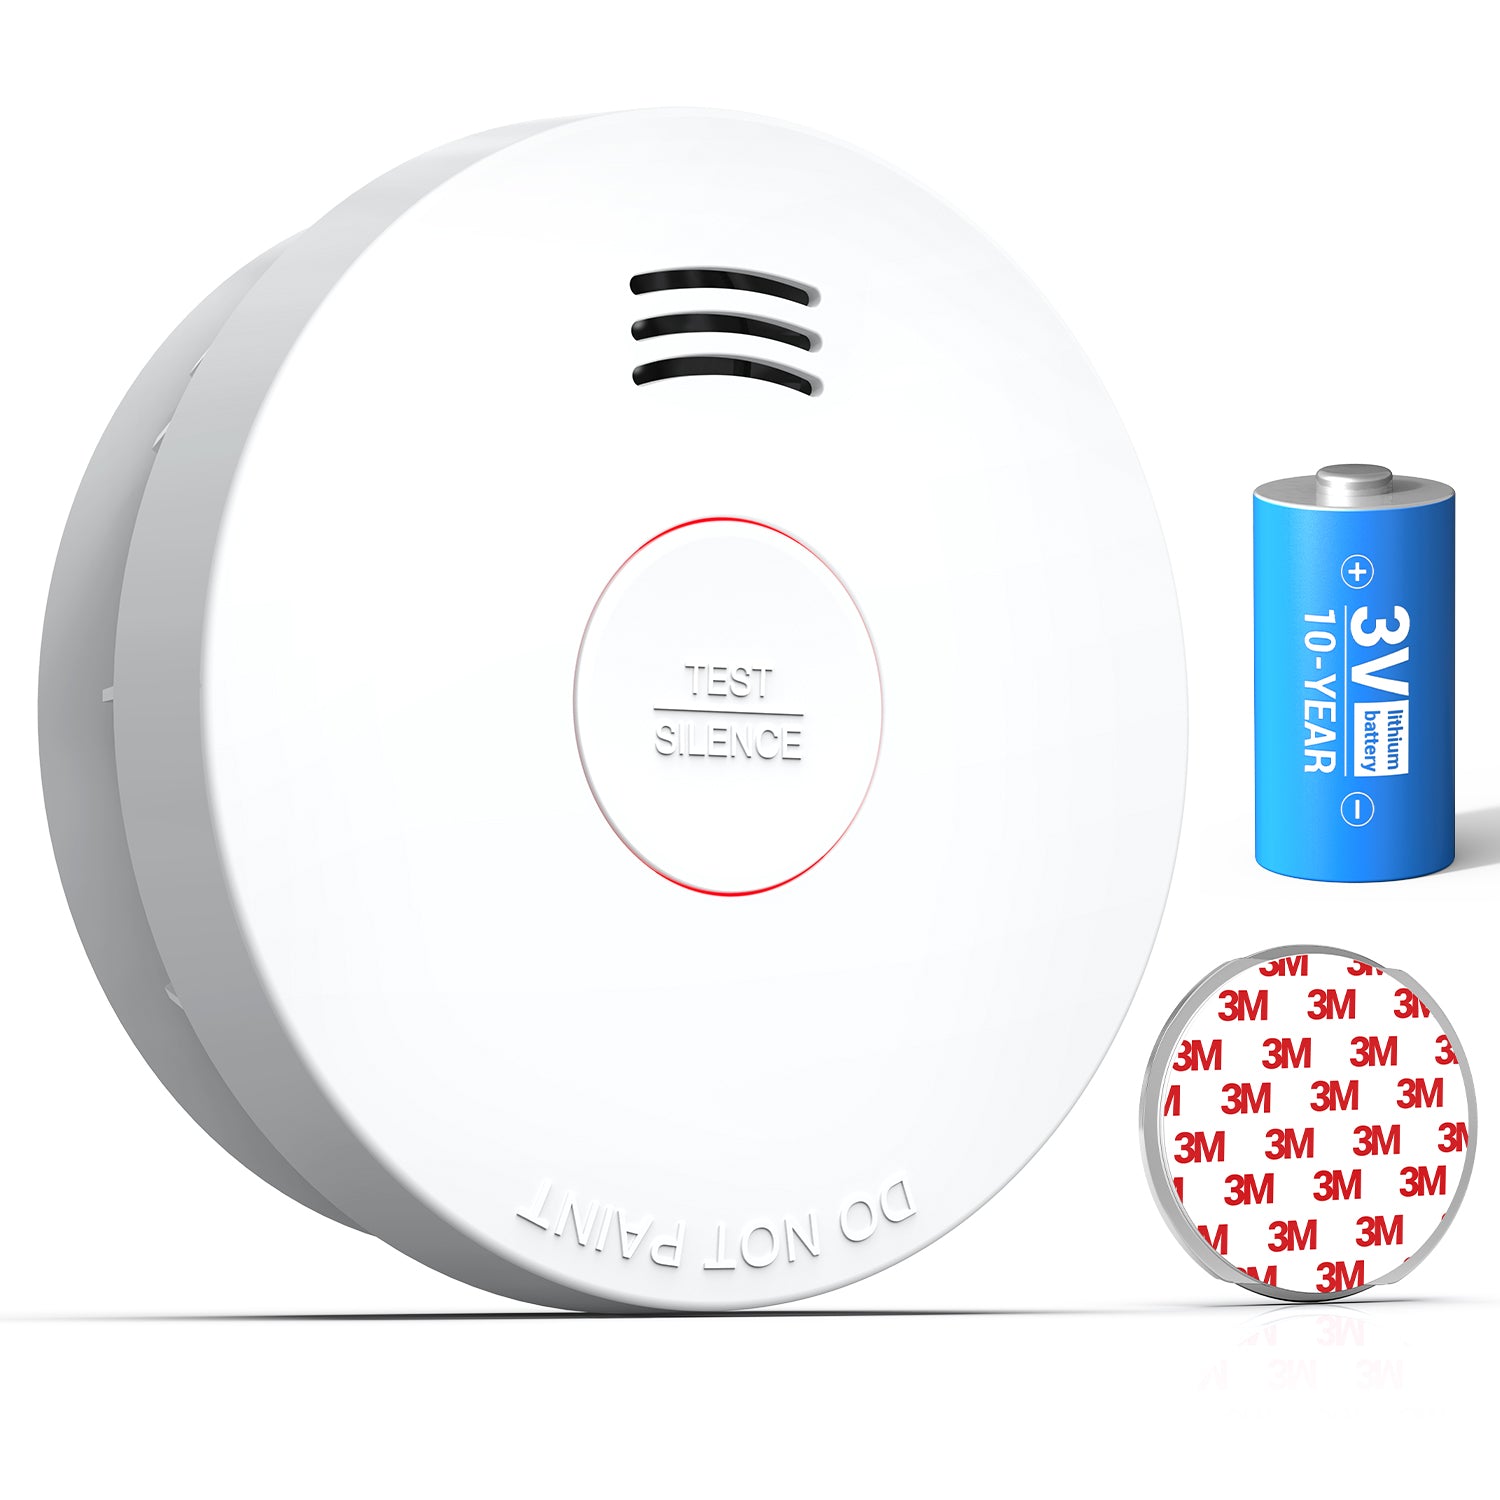 Siterwell GS525A Smoke Detector